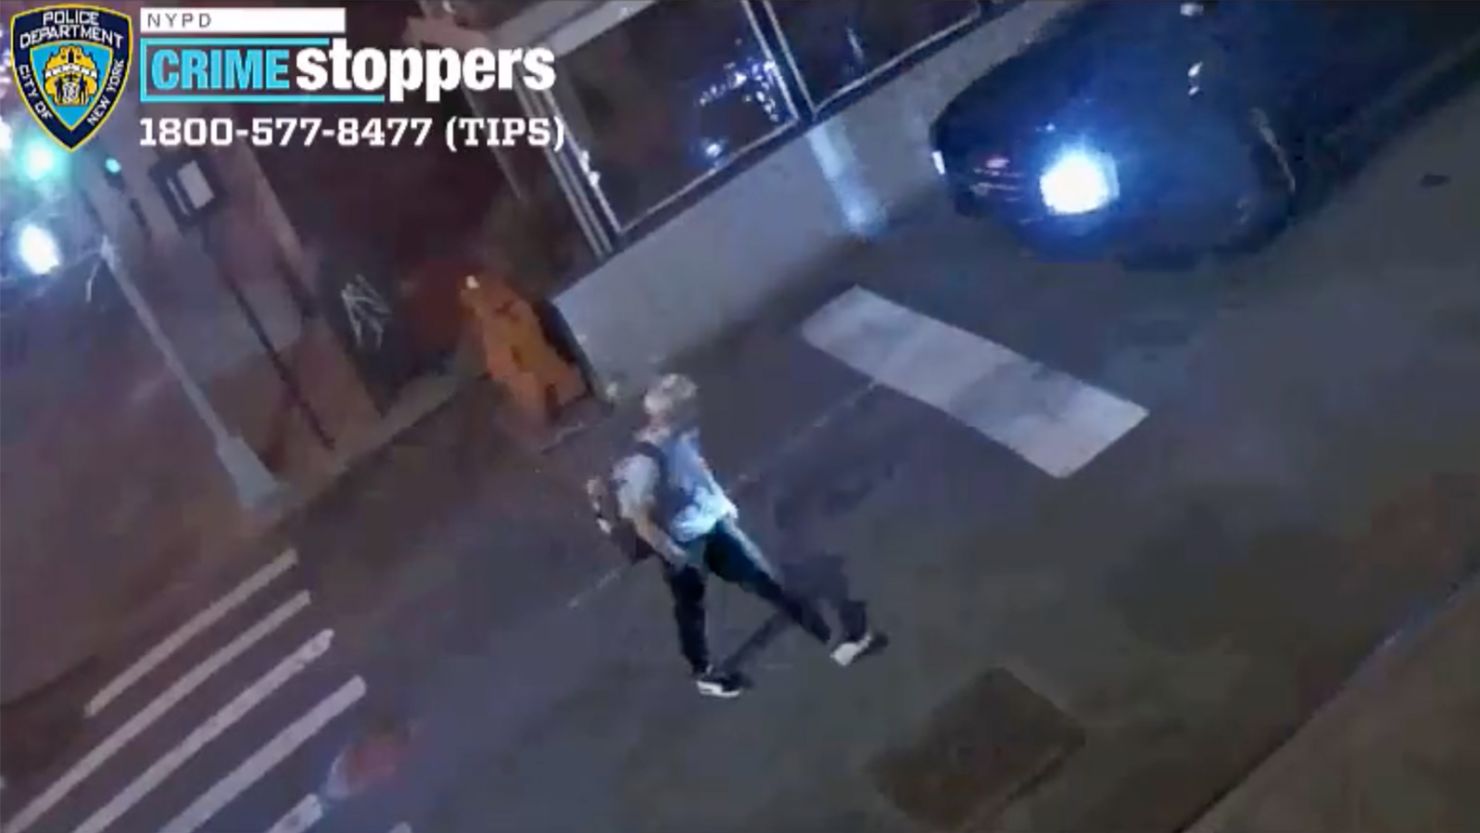 The NYPD said a man reportedly attacked Asian women in seven separate incidents over the weekend in Manhattan.